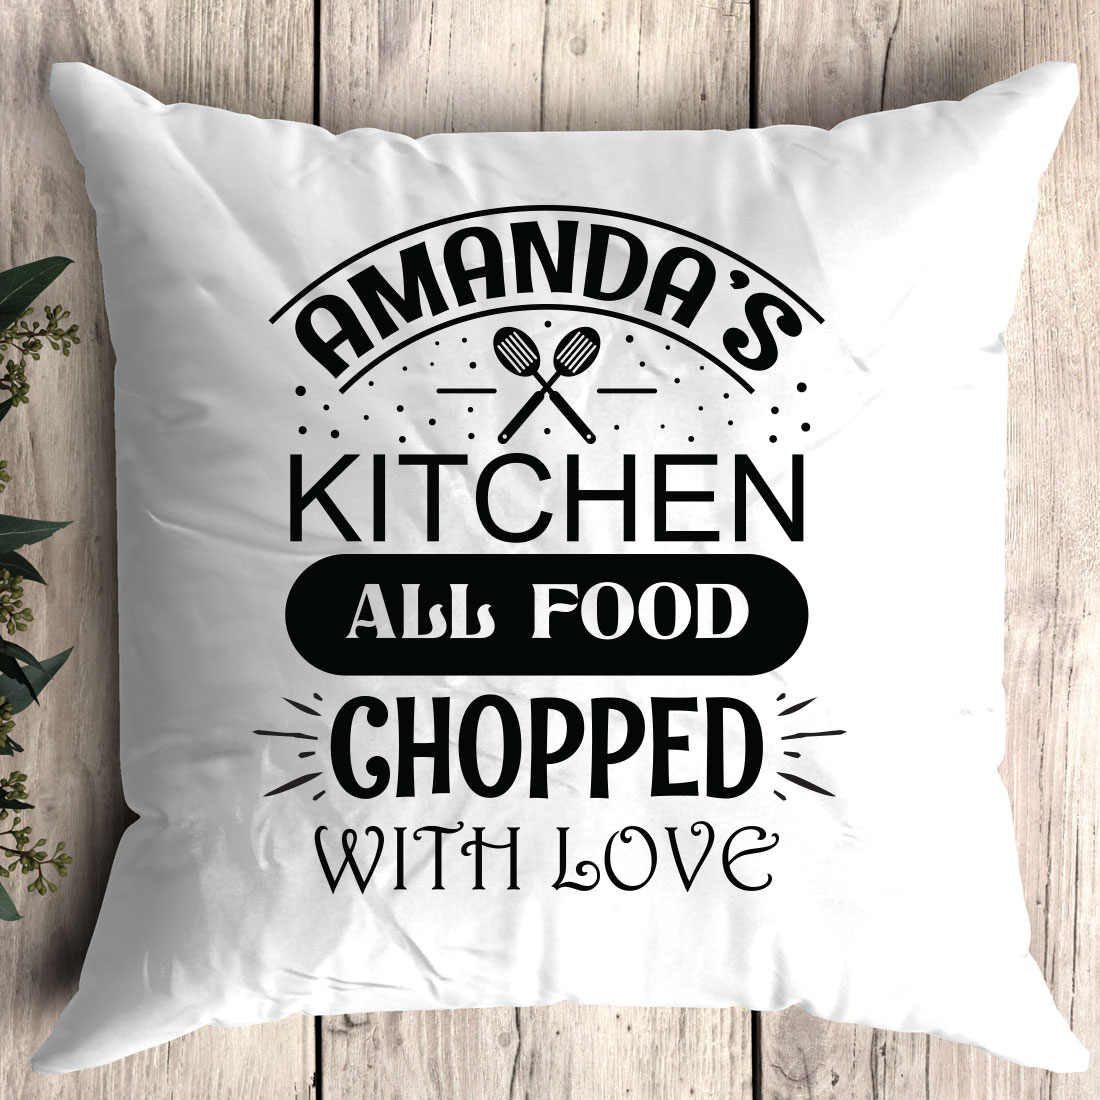 White pillow that says amanda's kitchen all food chopped with love.